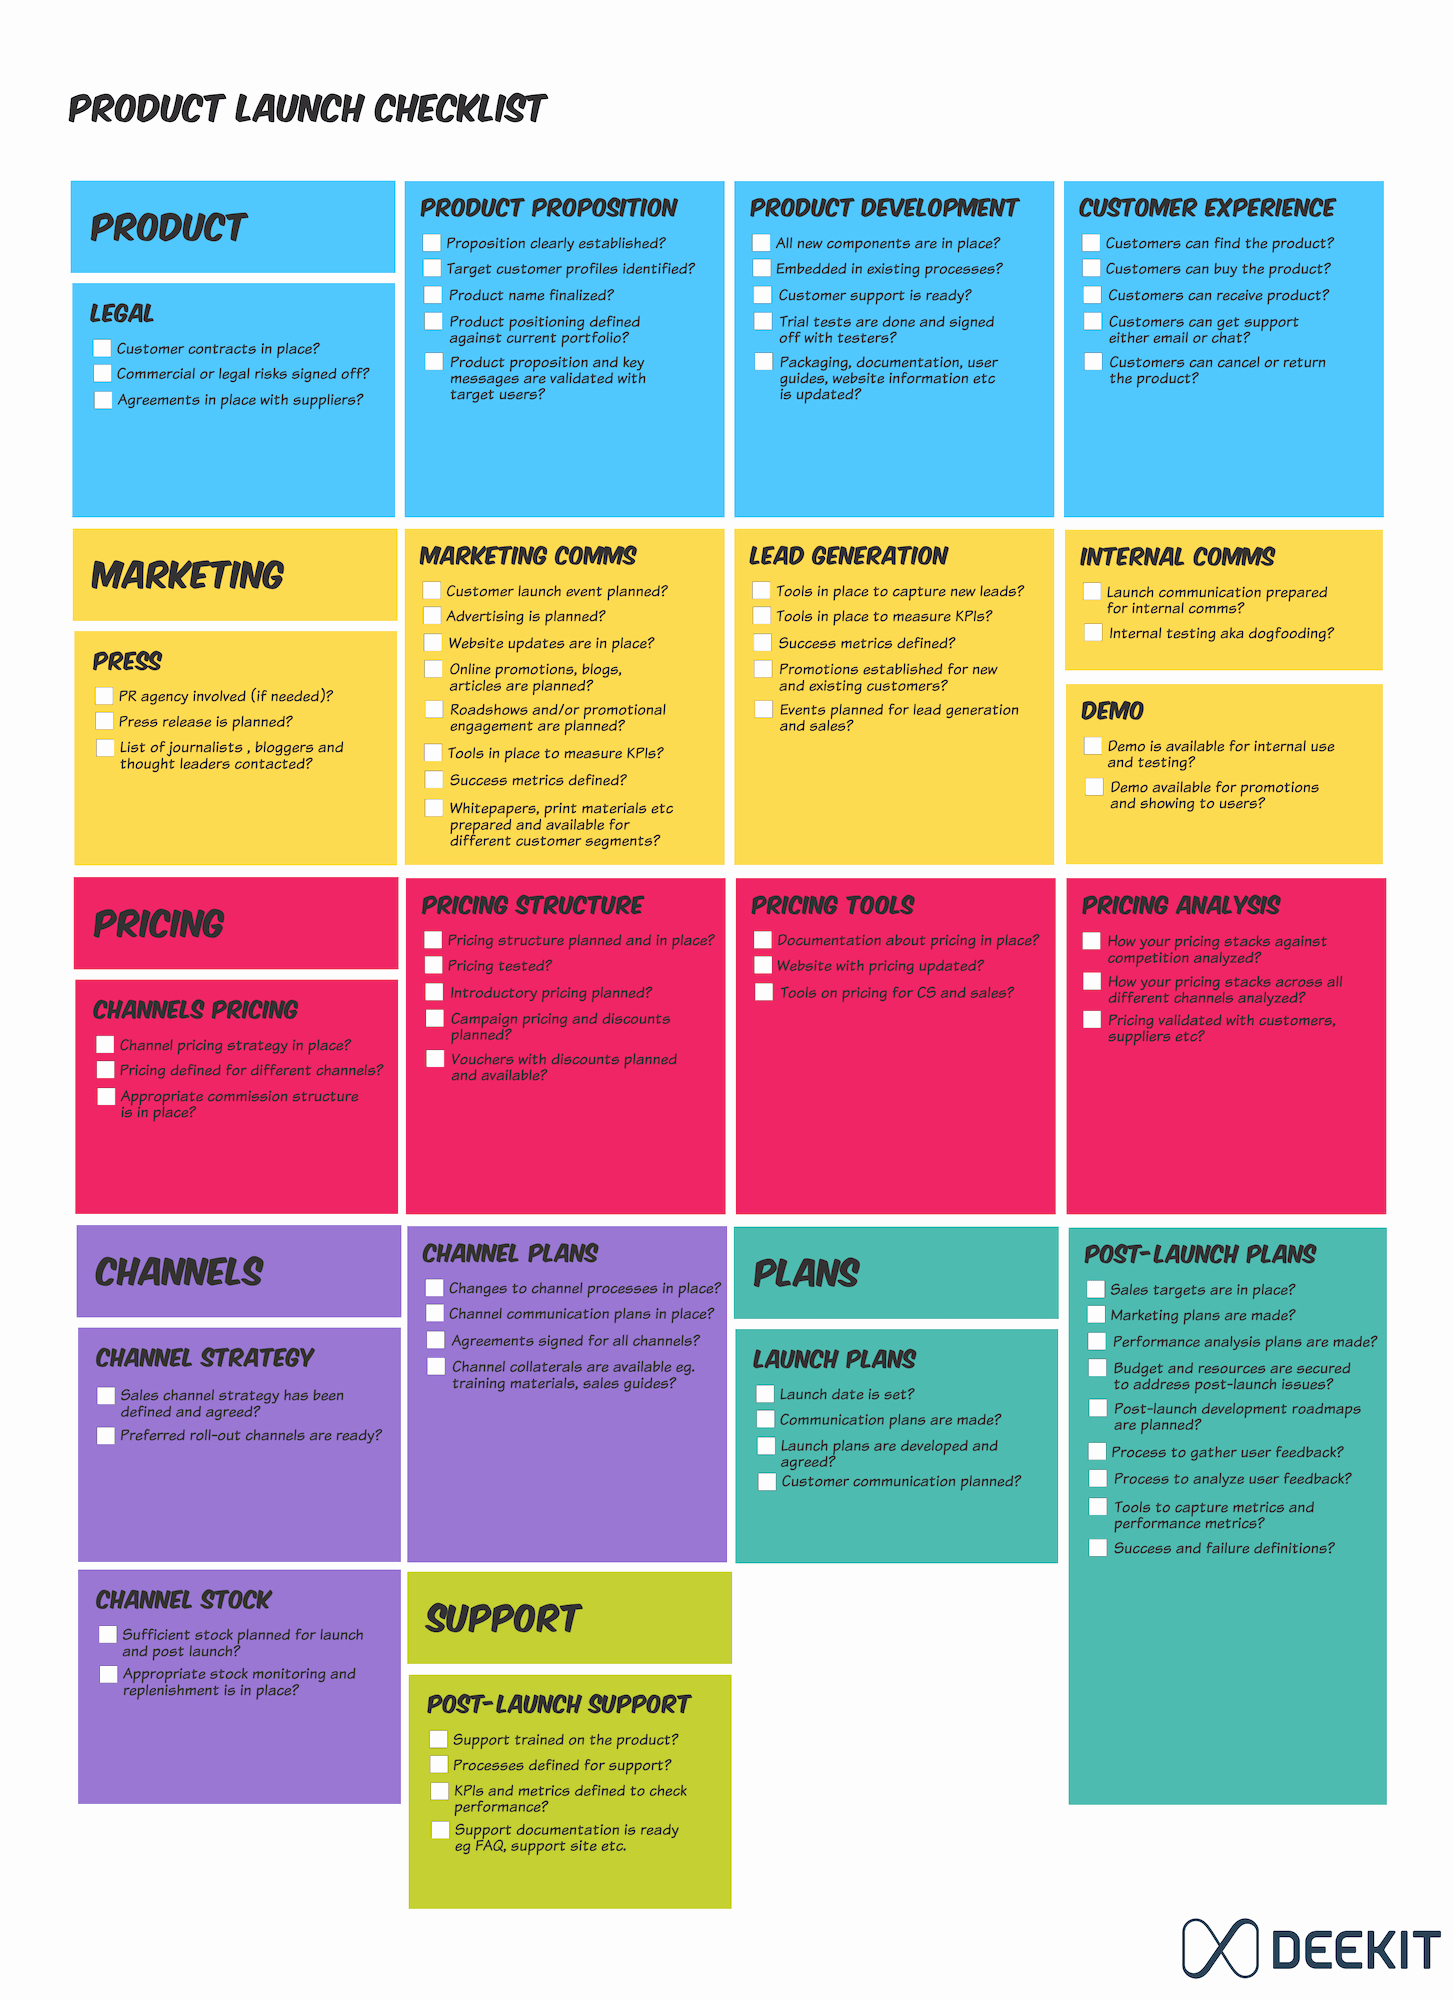 Product Launch Plan Template Best Of Product Launch Checklist — Deekit